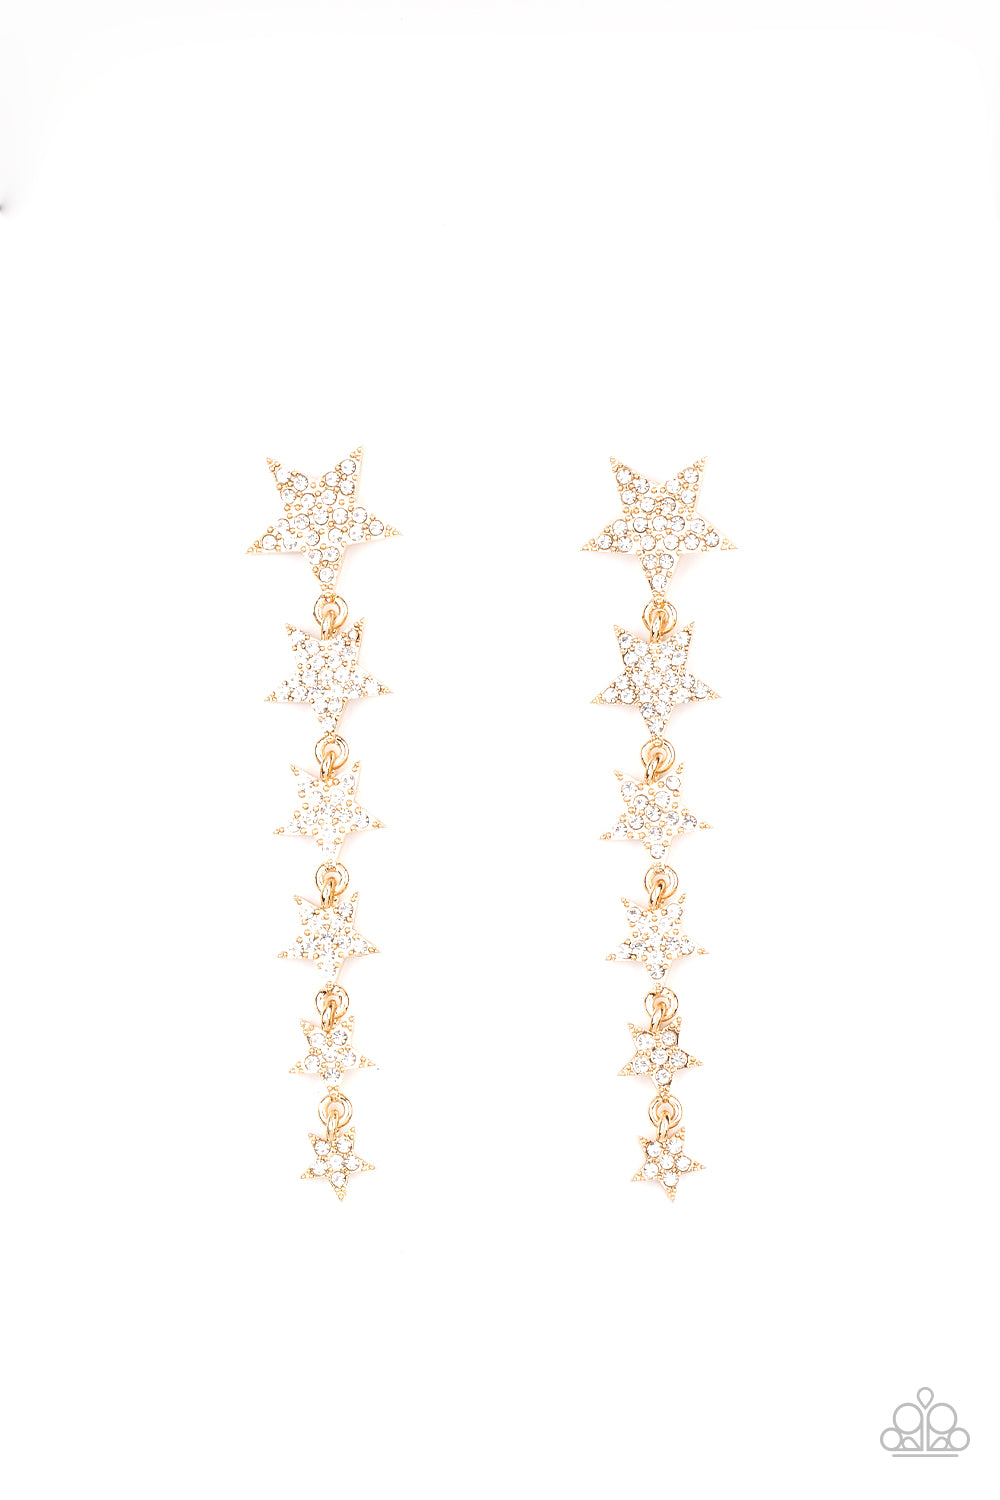 Paparazzi Accessories - Americana Attitud - Gold Star Earrings dotted with dainty white rhinestones, a stellar collection of gold stars graduate in size as they cascade from the ear for an out-of-this-world fashion. Earring attaches to a standard post fitting.  Sold as one pair of post earrings.